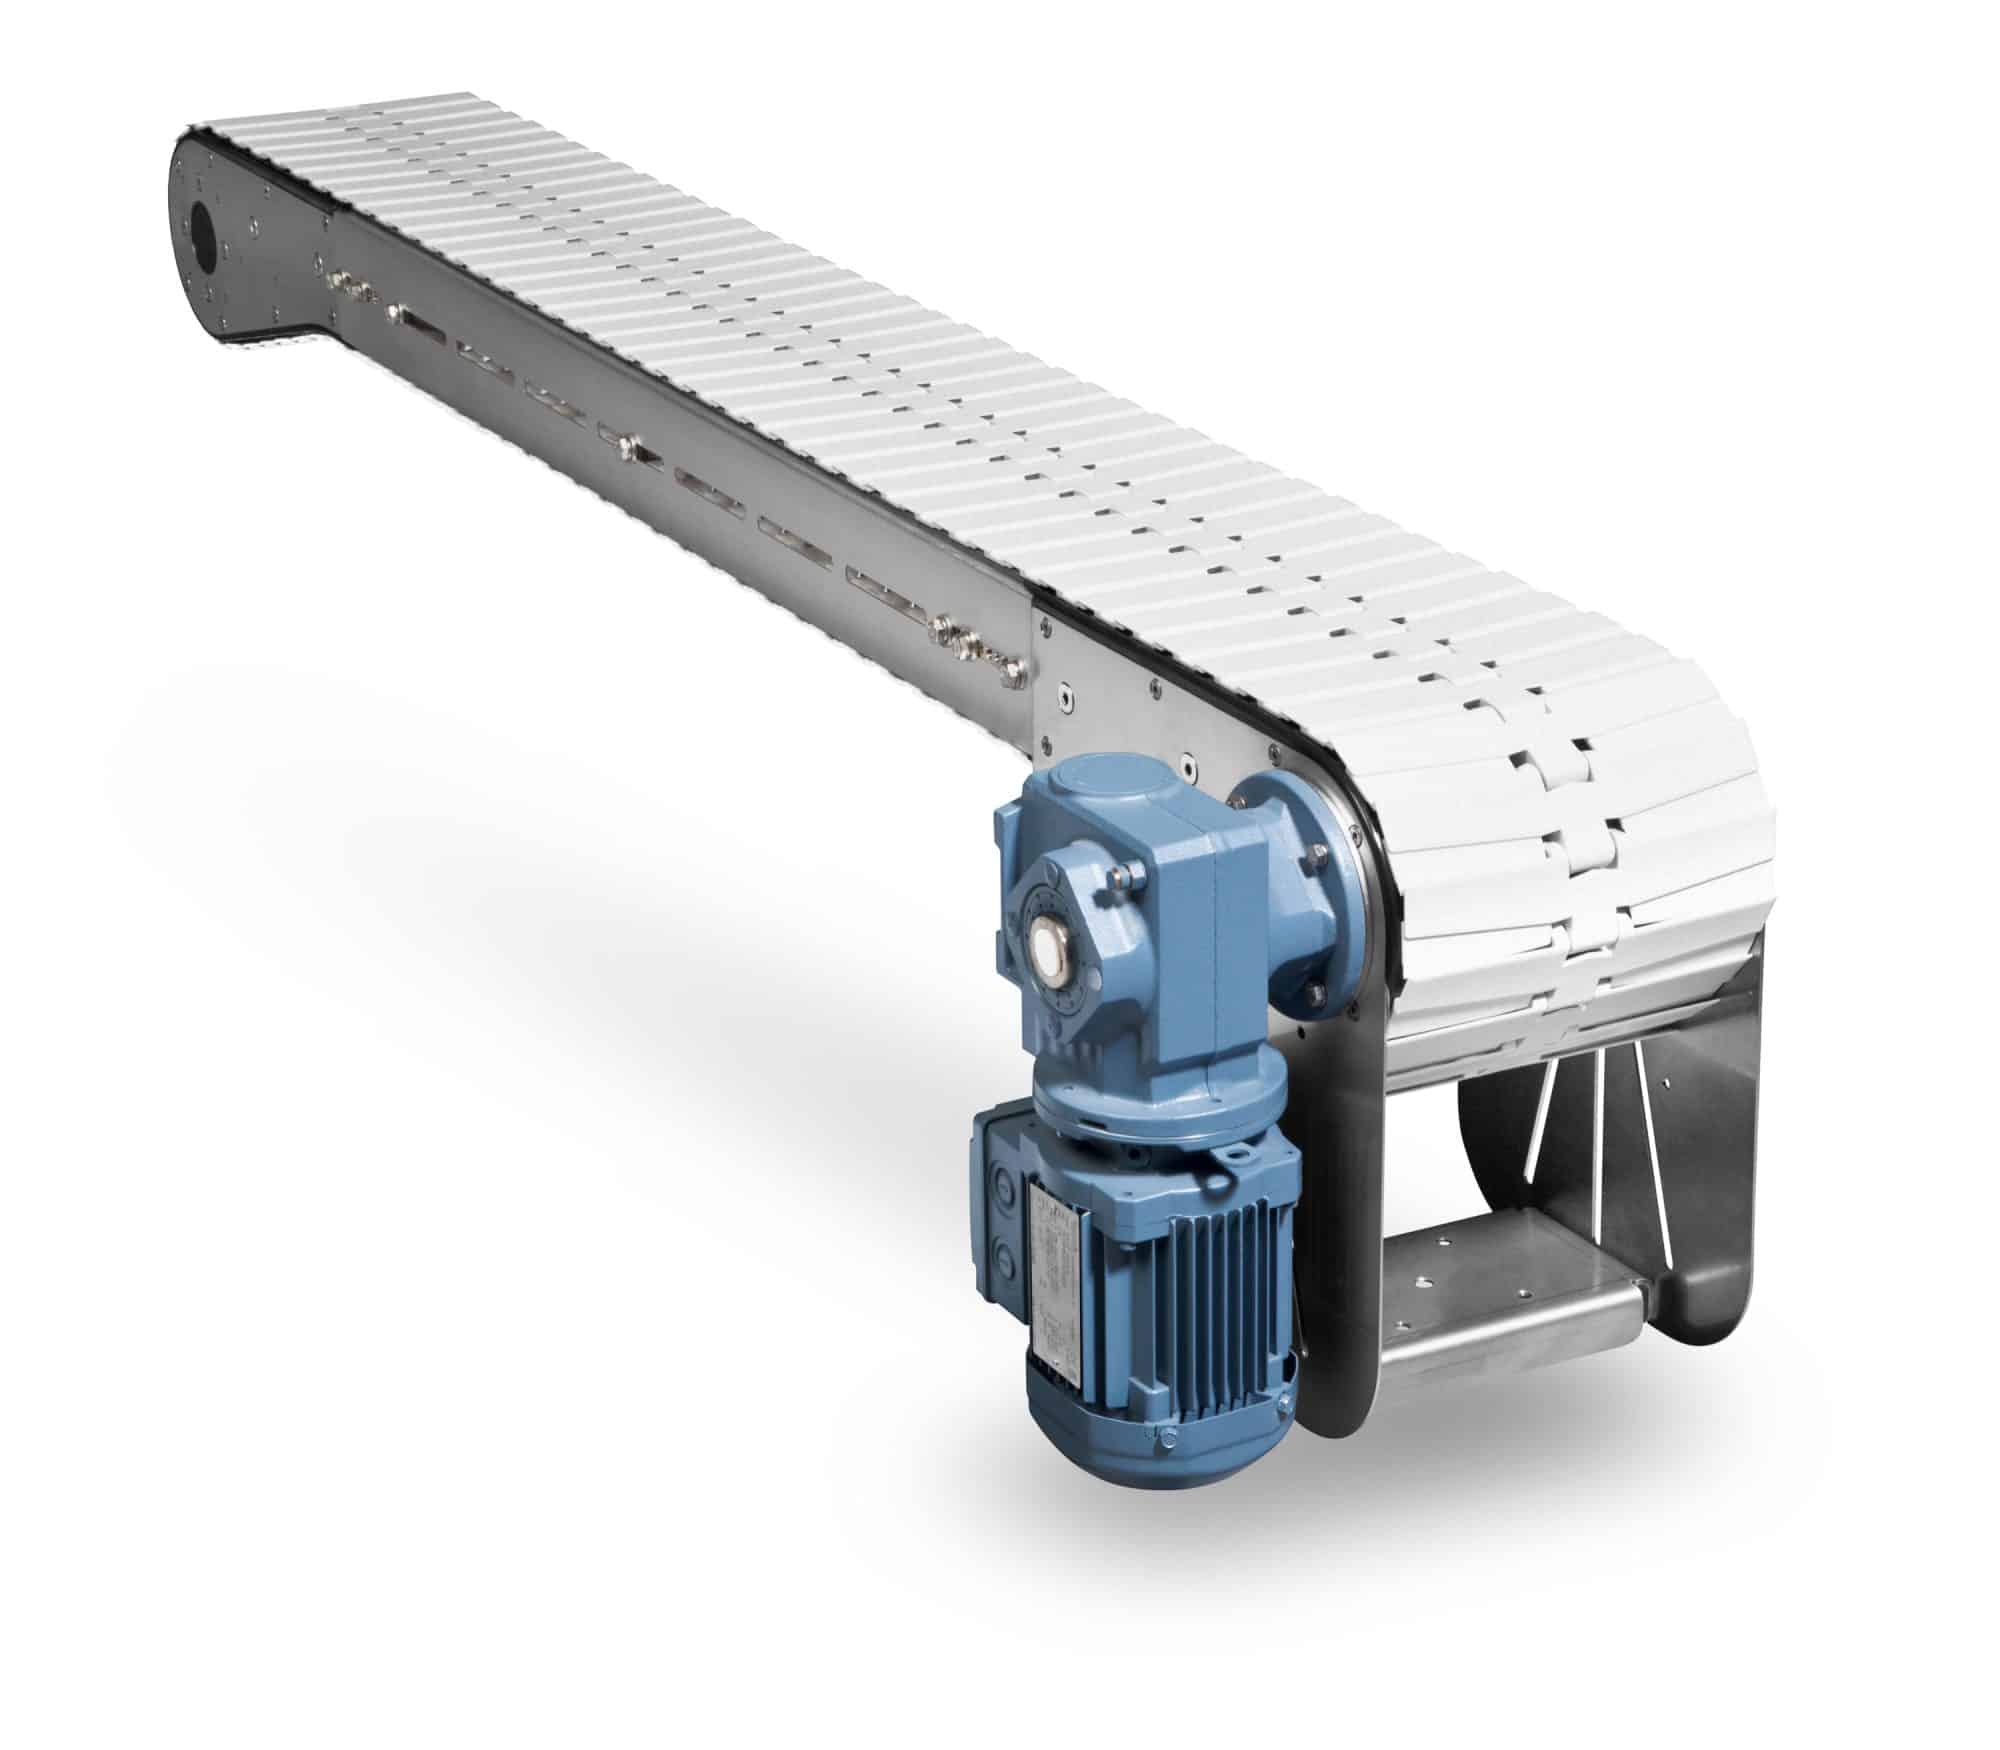 This is one of the more broader ETS chain conveyors. They come in different sizes, adaptable to your specific situation.